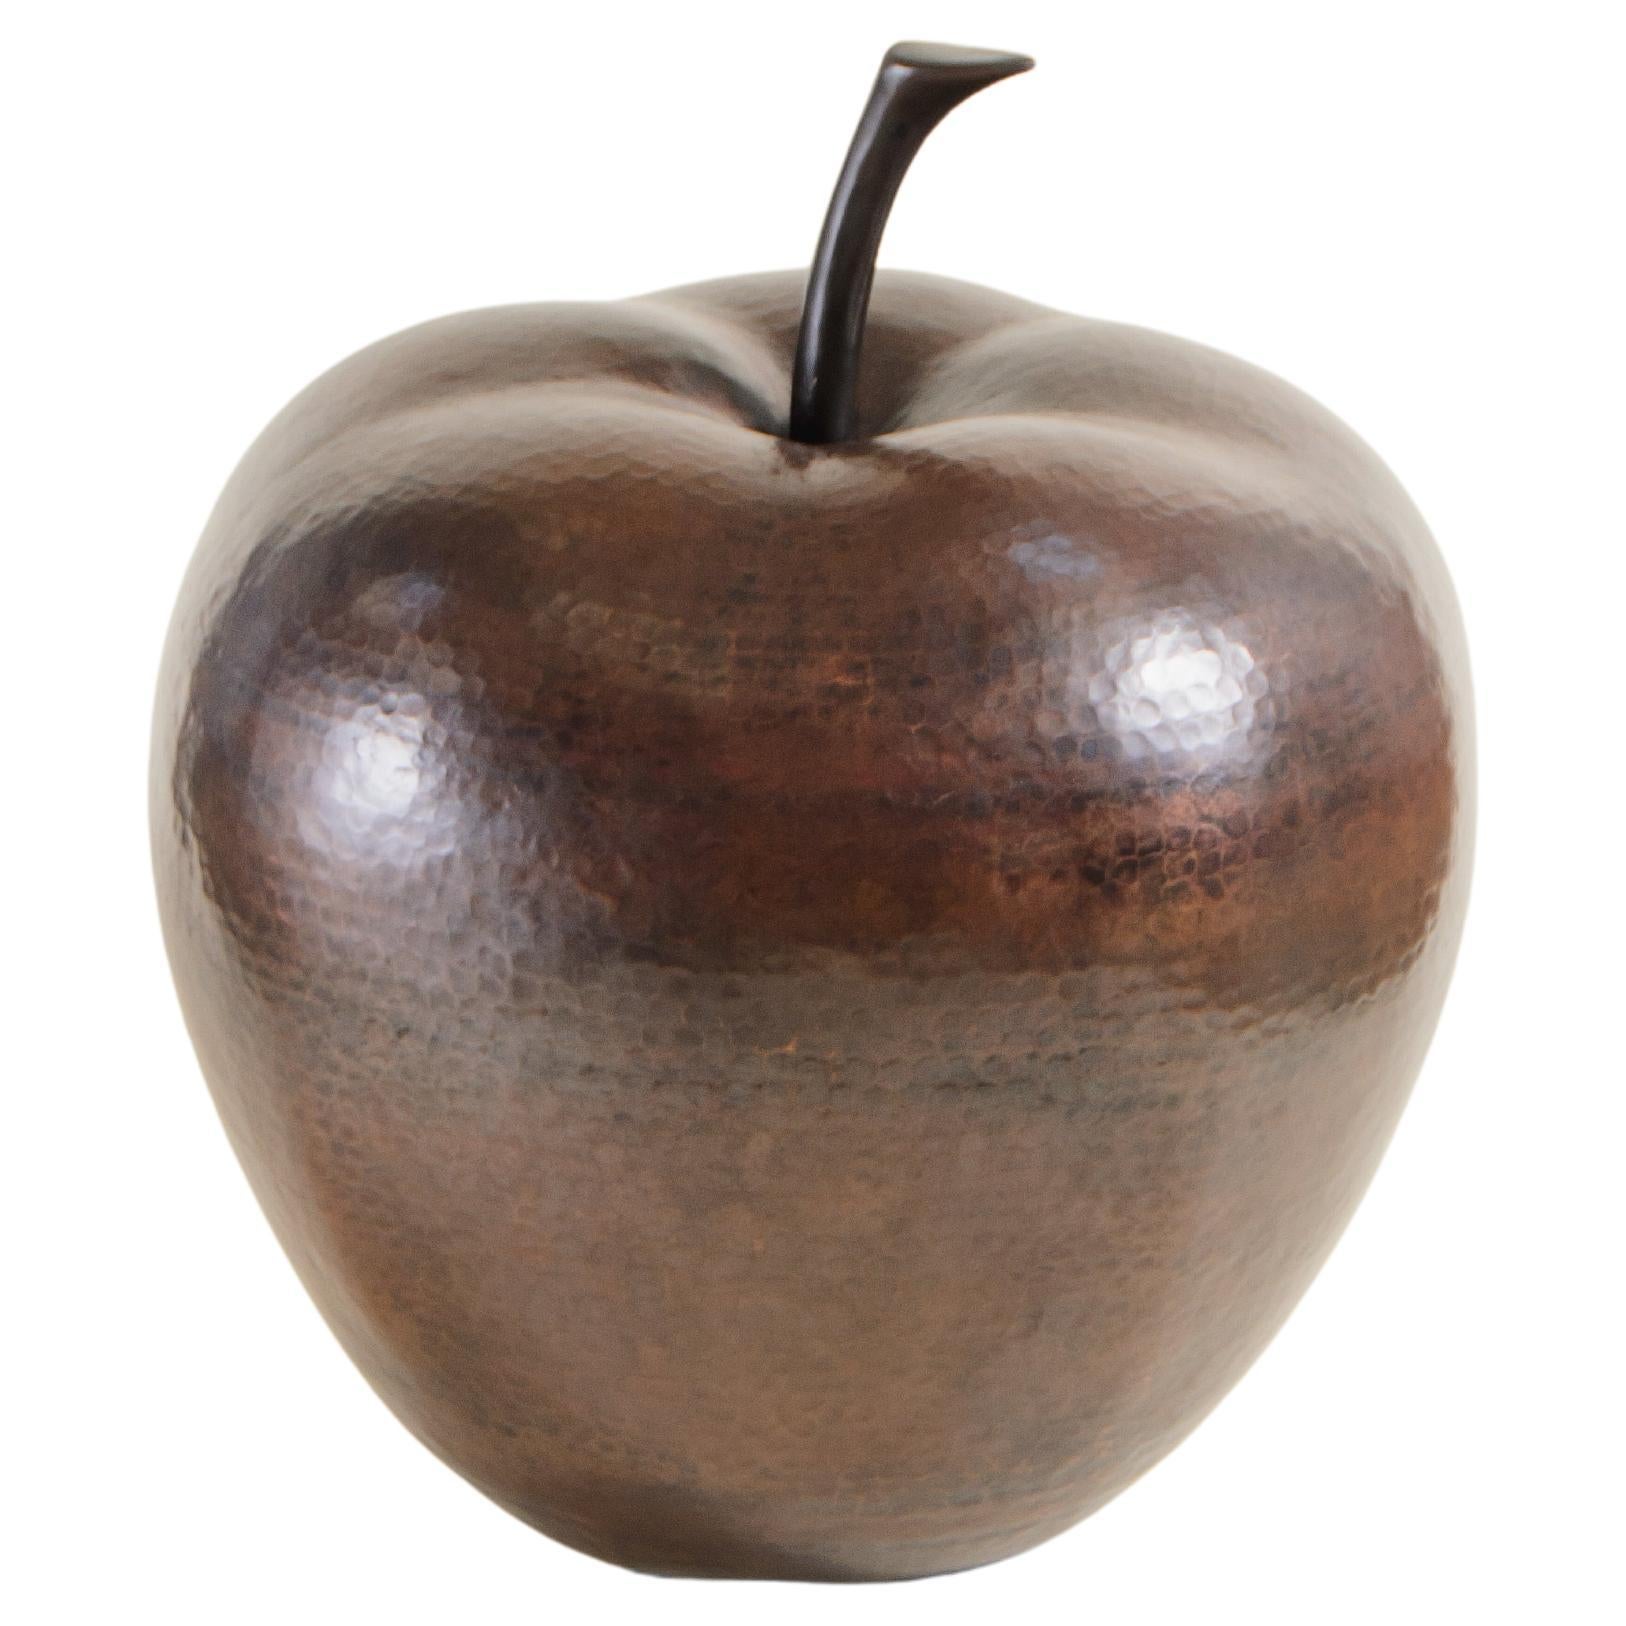 Contemporary Copper Apple Sculpture by Robert Kuo, Repoussé, Limited Edition For Sale